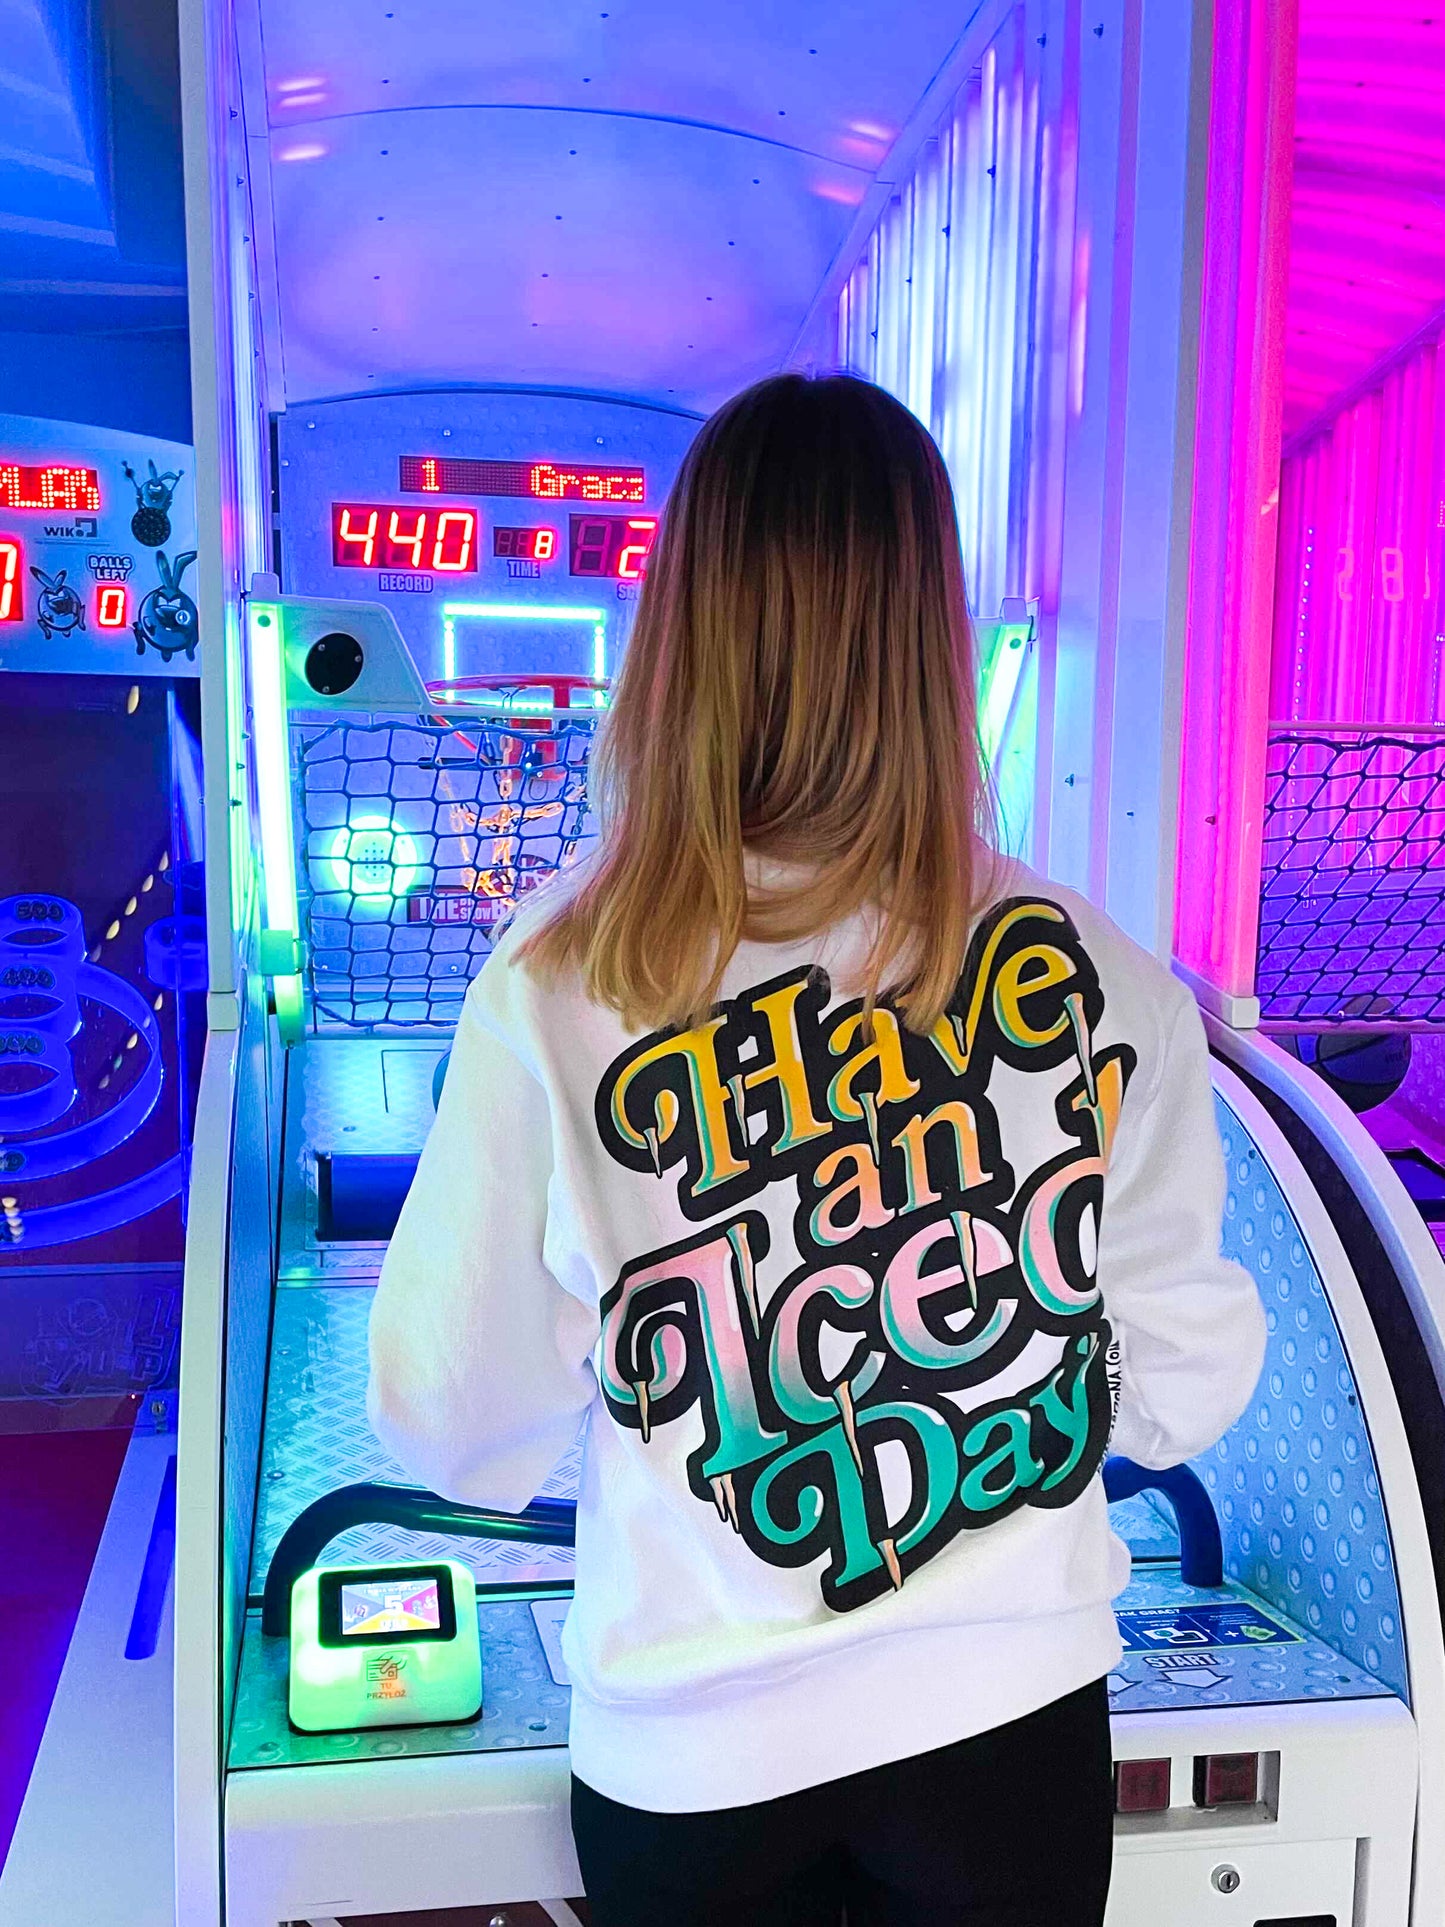 "Have an Iced Day" Sweater